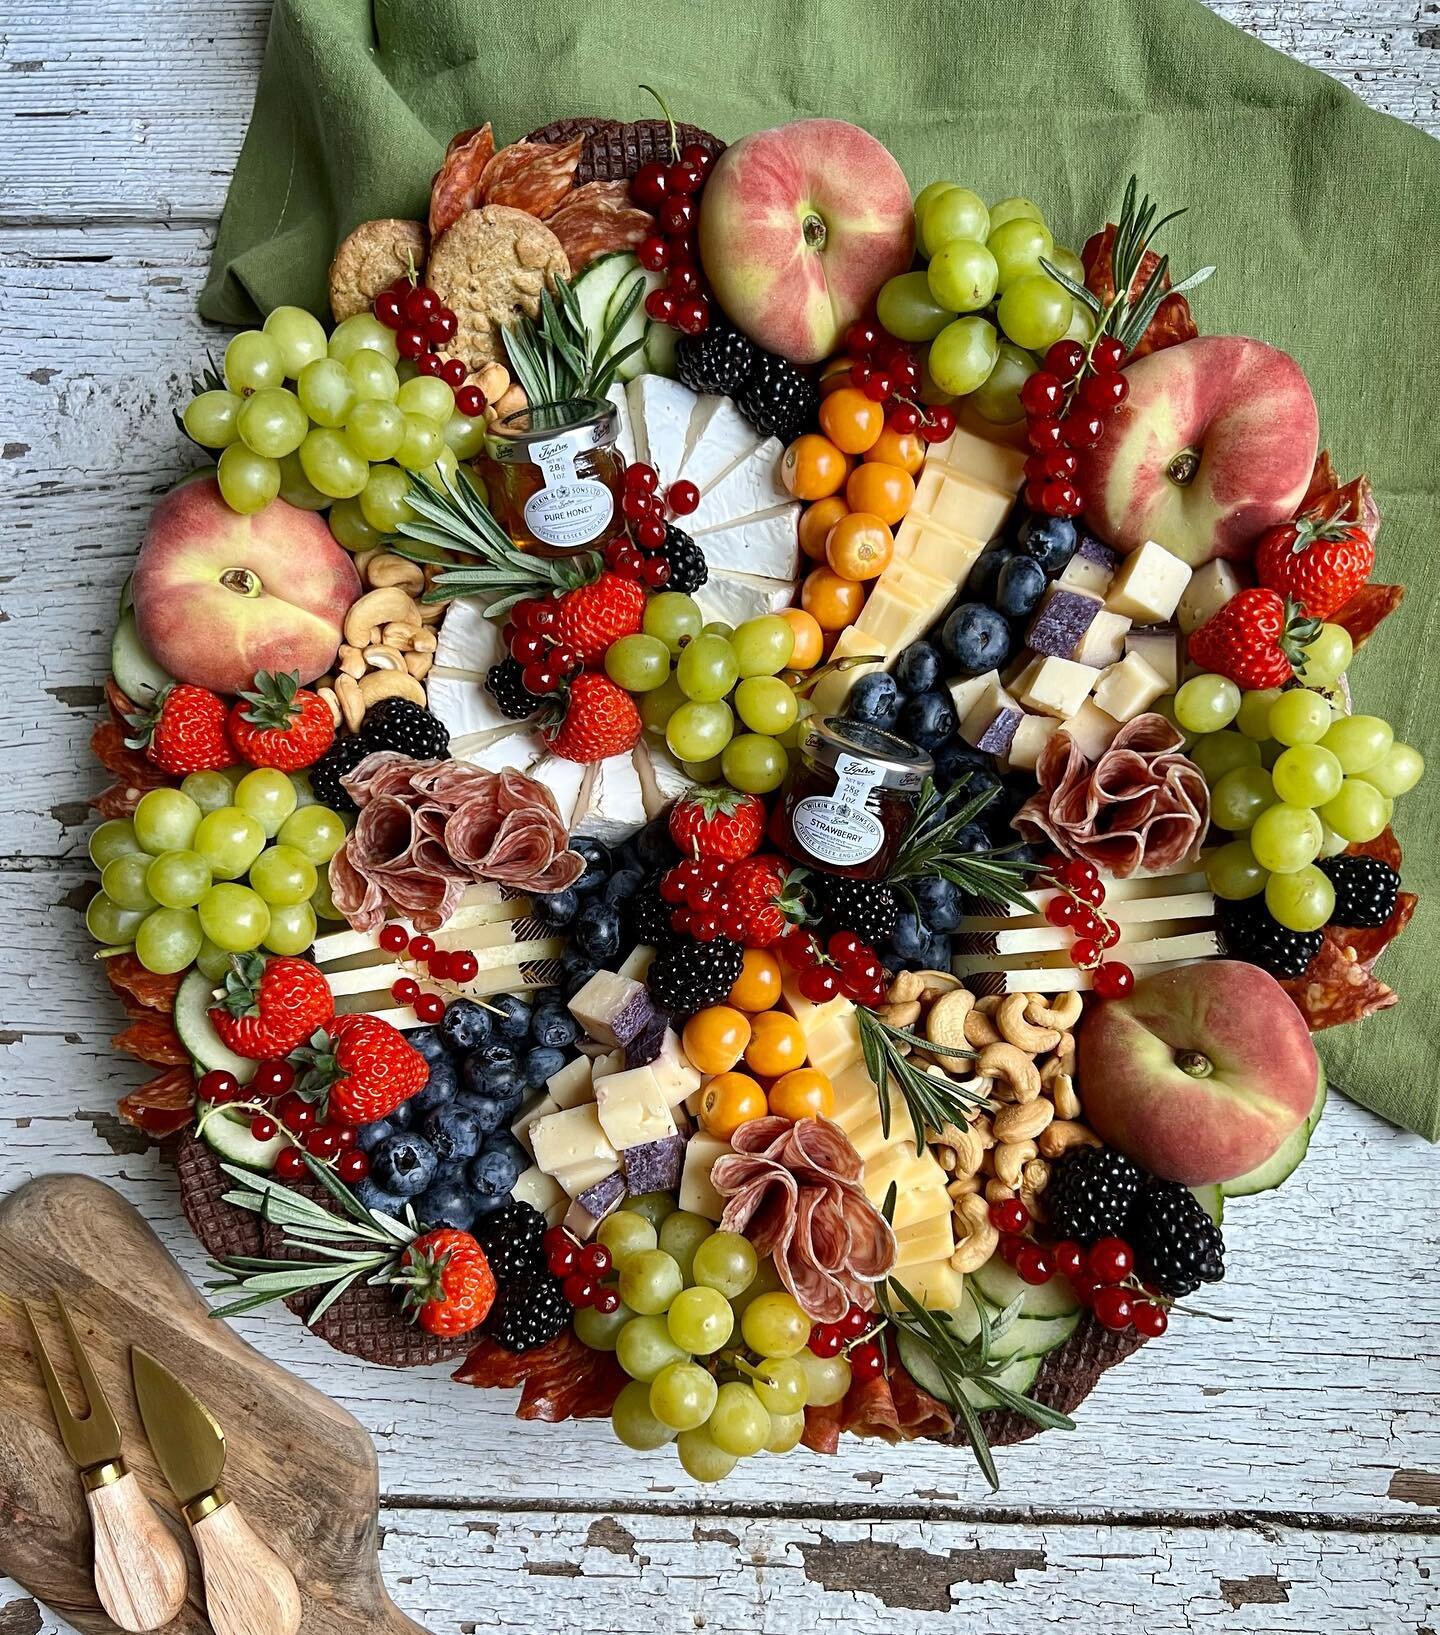 Summer, Summer, Summertime 🌞 is for the freshest of fruit and most luxurious of cheese and charcuterie 🍇 

From Smoked Gouda, to 8 mos. Manchego, to Camembert, to @sartoricheese Merlot BellaVitano, you can expect nothing but the best from this spec